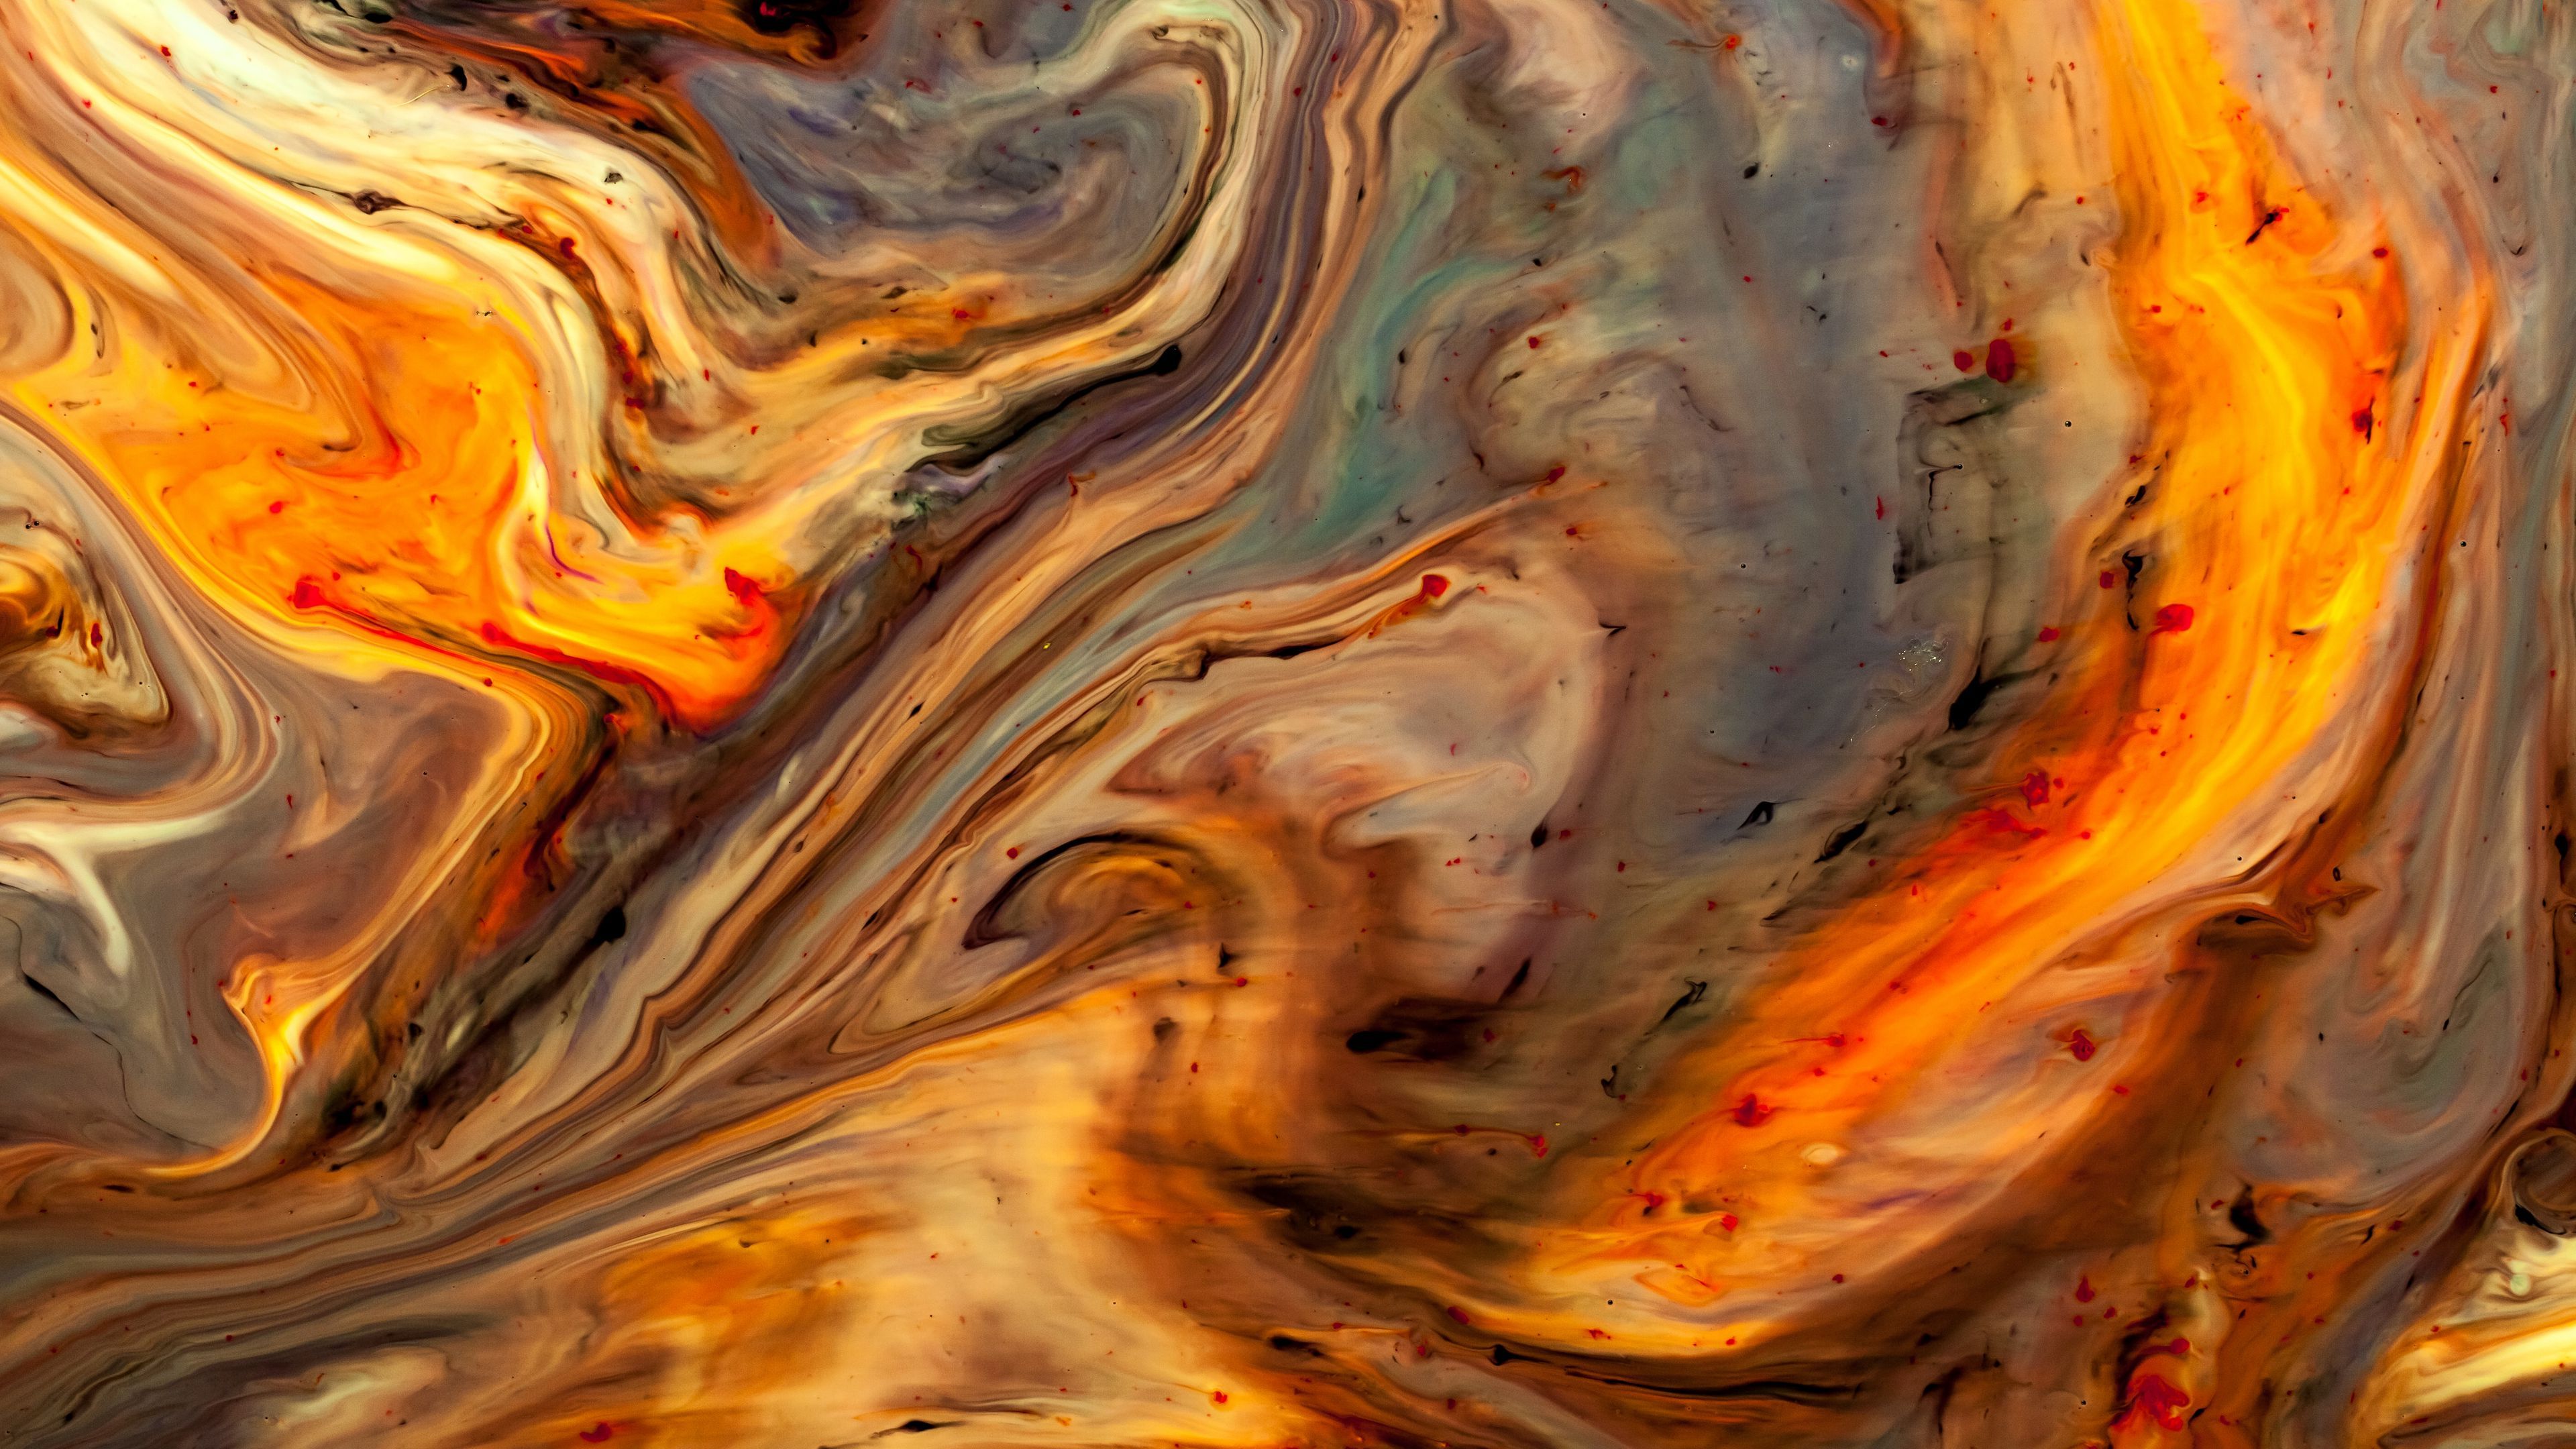 Download wallpaper 3840x2160 paint, fluid art, stains, liquid, colorful, yellow 4k uhd 16:9 HD background